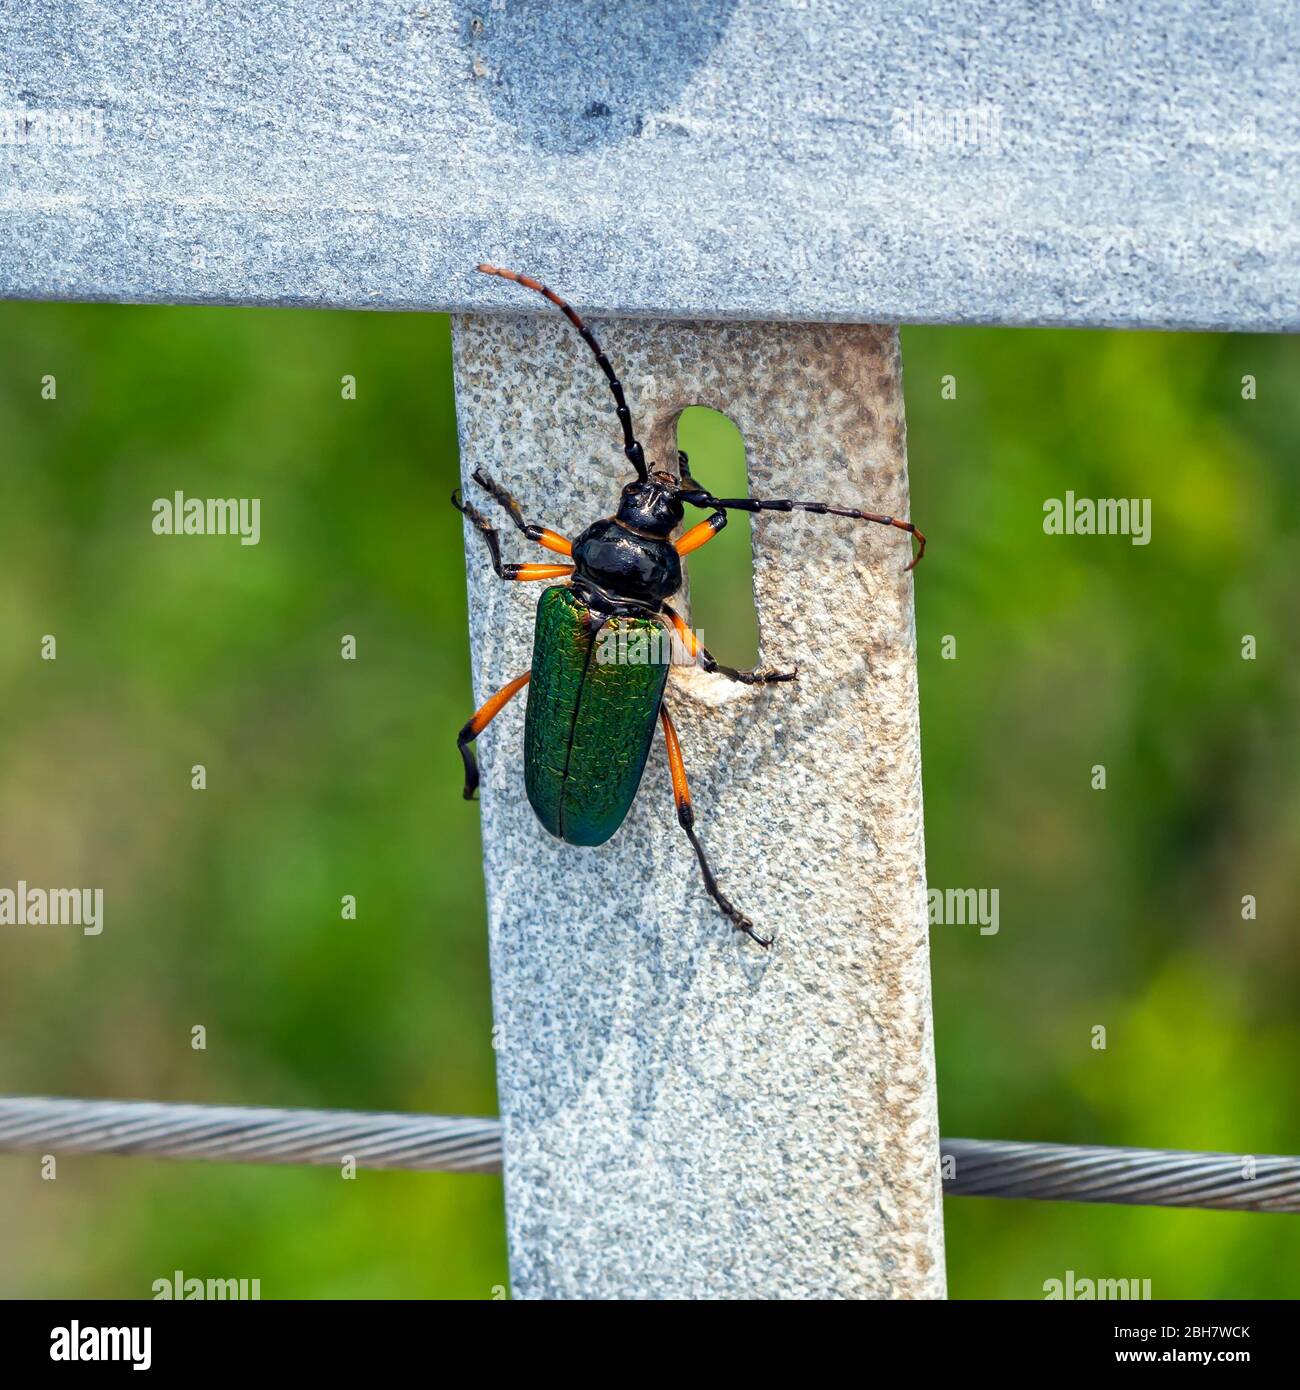 A Callona rimosa, or Beautiful Mesquite Borer beetle. Photo taken at the Oso Bay Wetlands Preserve and Learning Center.in Corpus Christi, Texas USA. Stock Photo